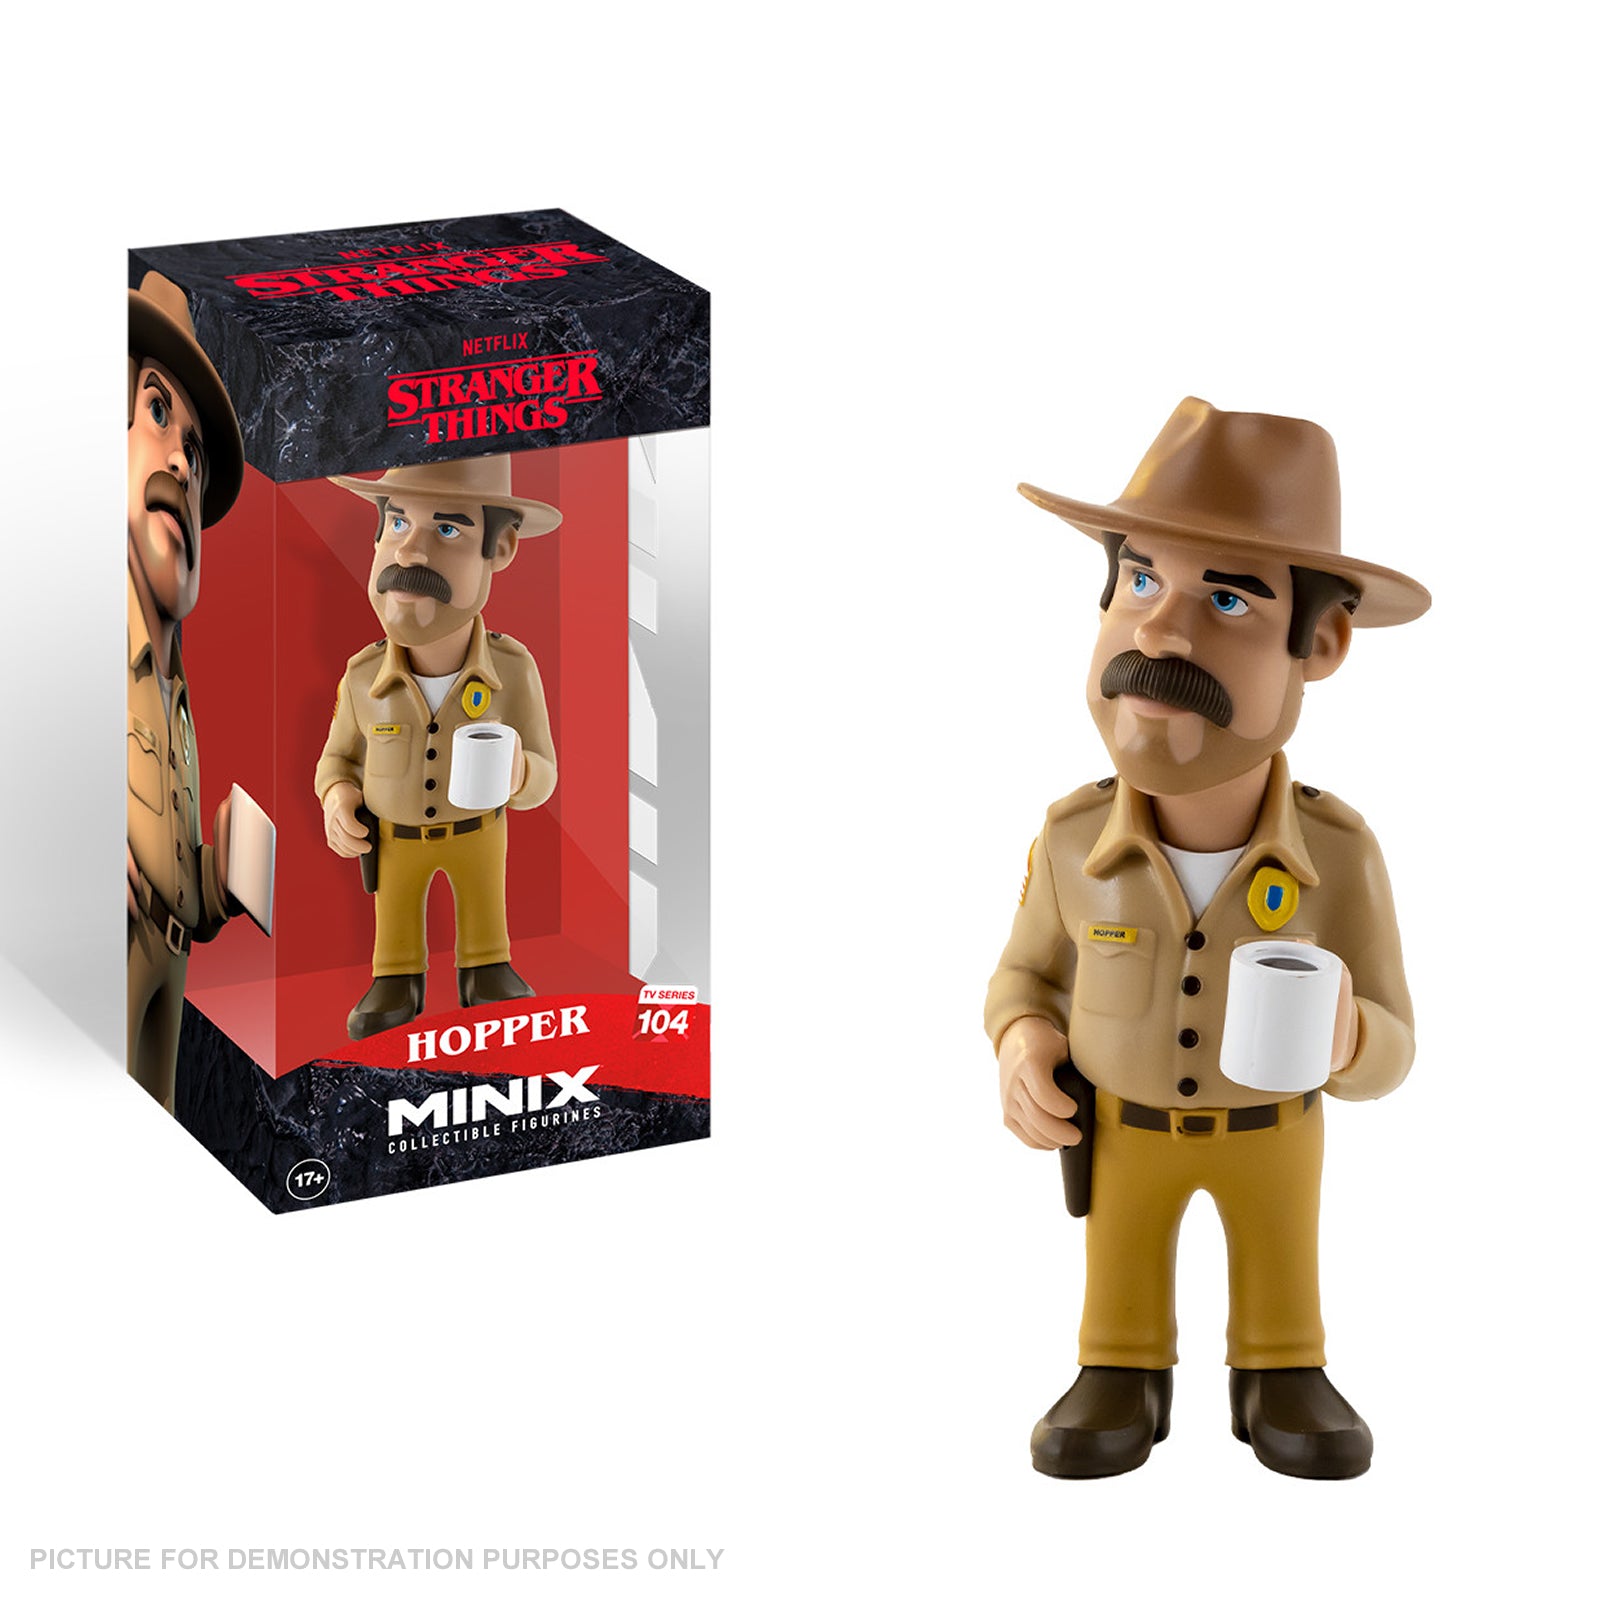 MINIX Collectable Figurine - HOPPER - Stranger Things